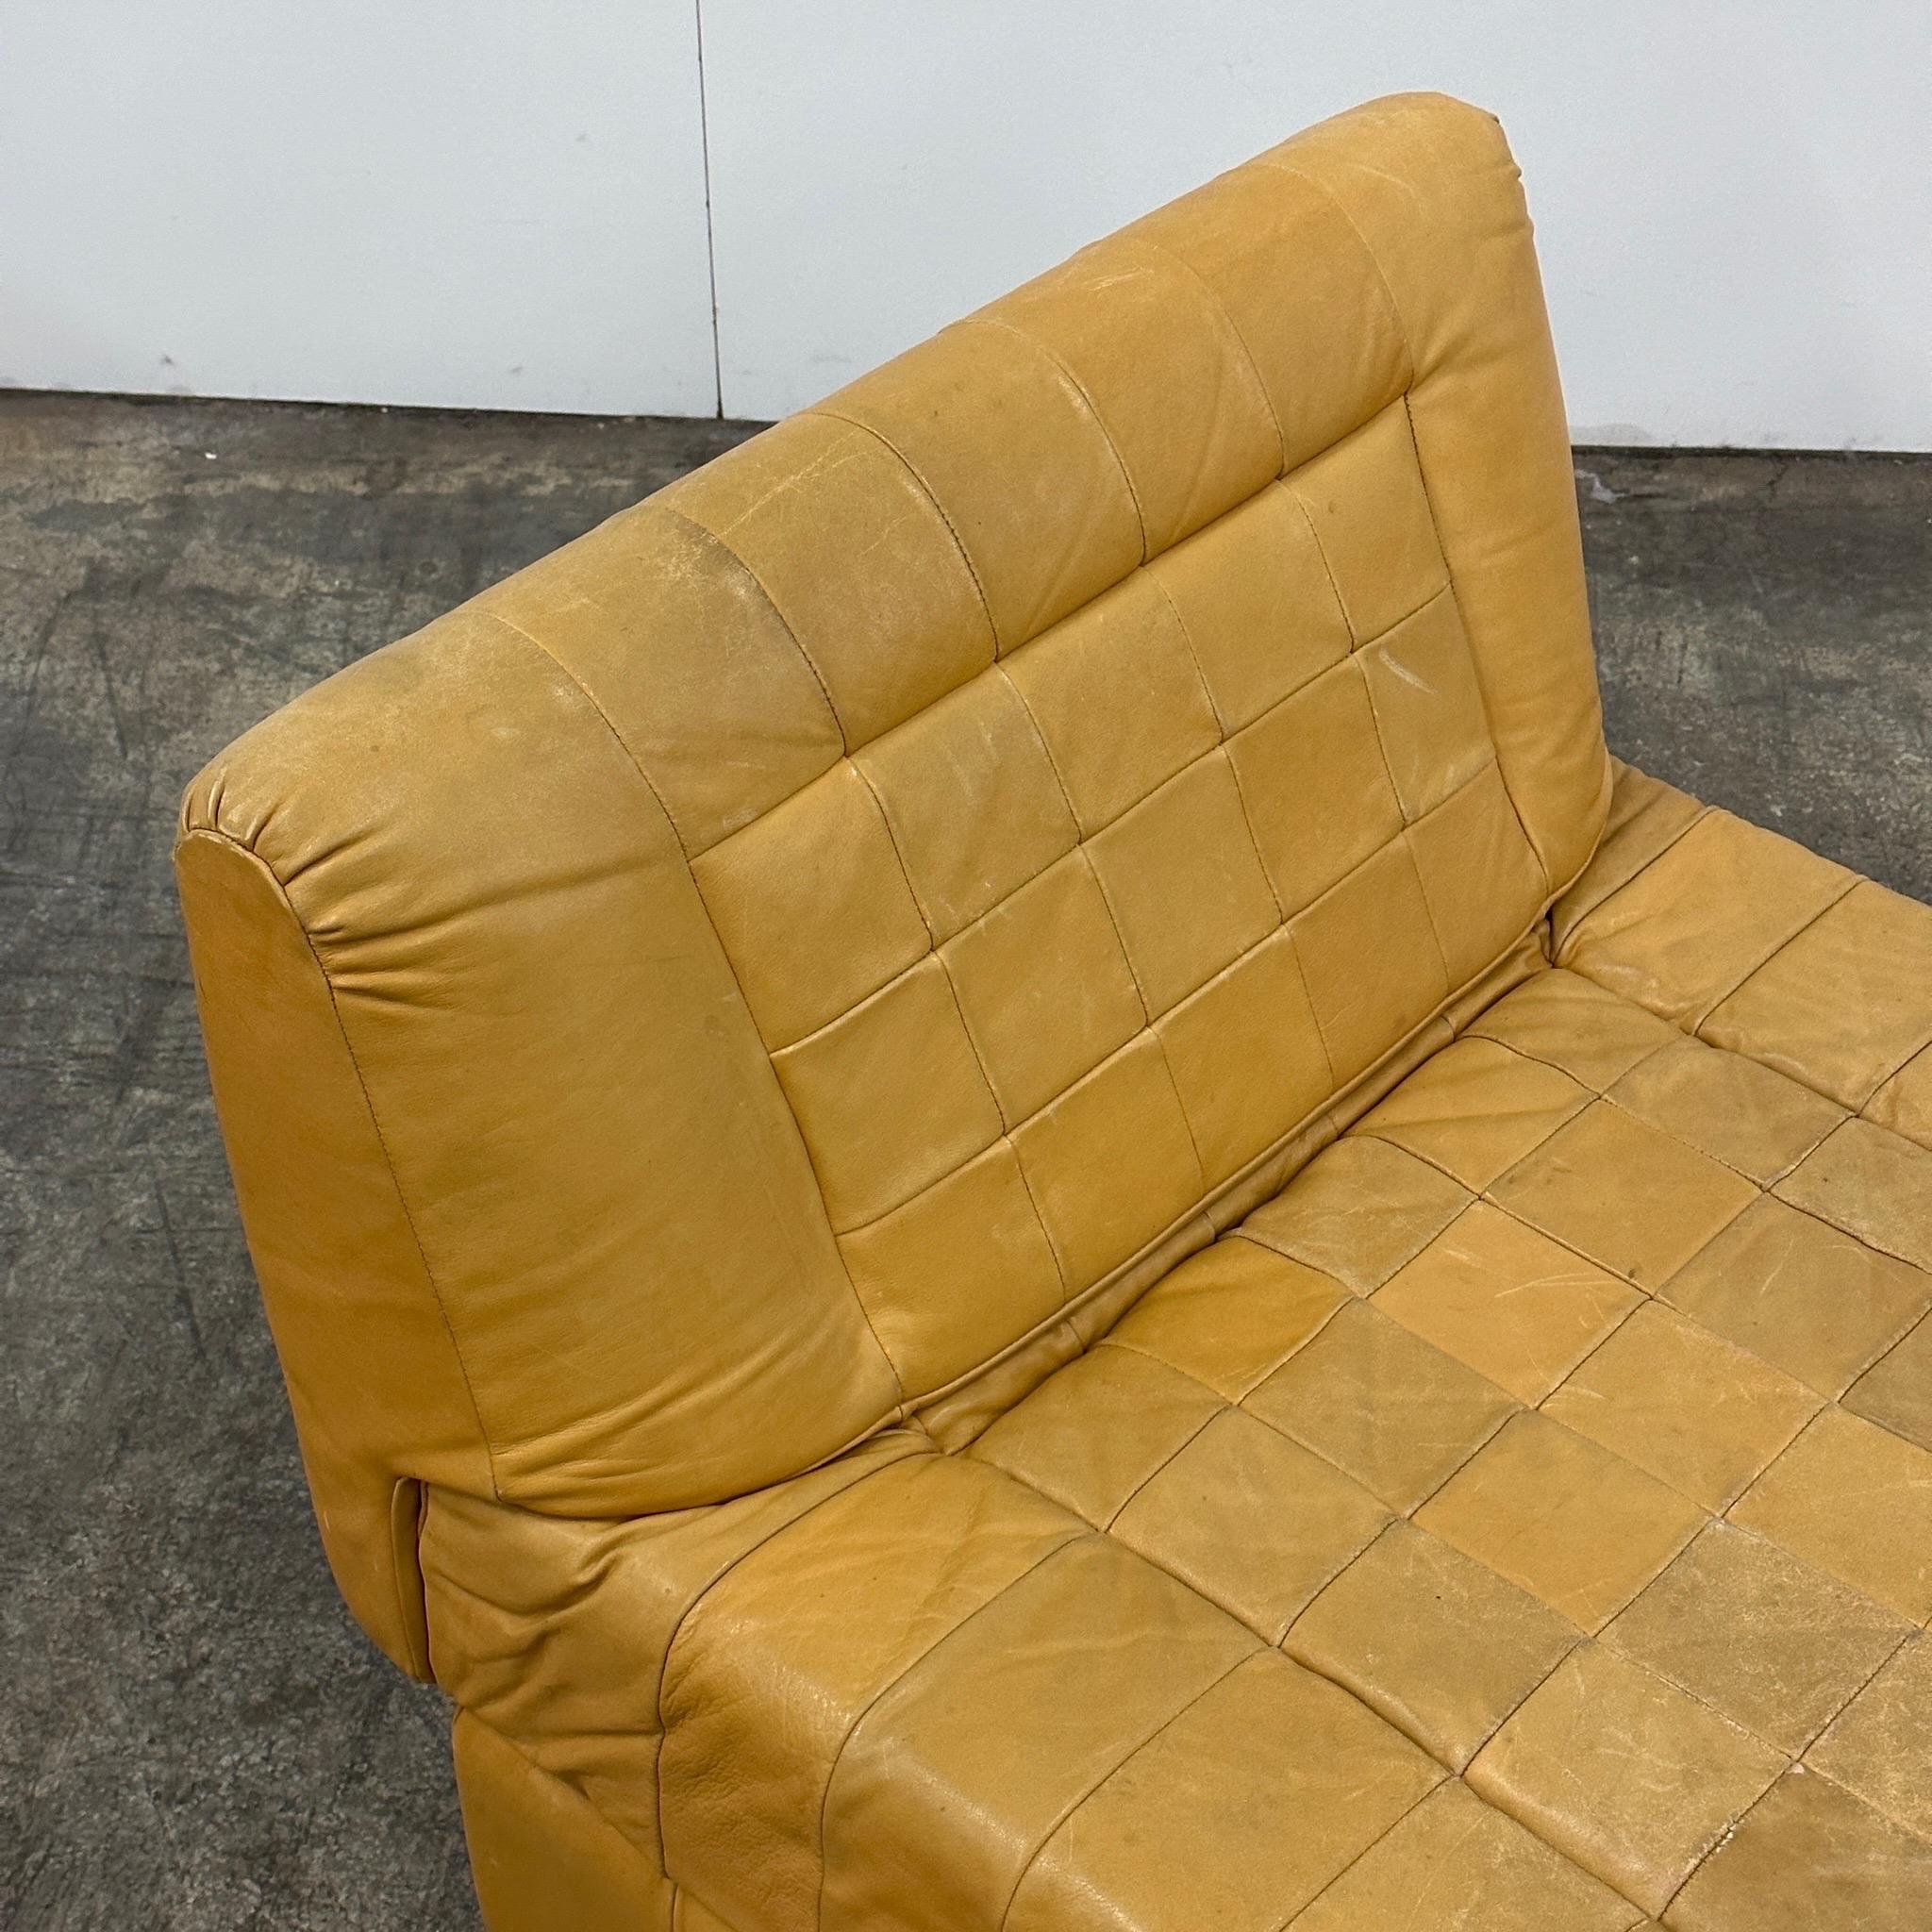 c. 1970s. Price is for the set. Contact us if you’d like to purchase a single item. Can also be connected as a settee. Backs are removable. 